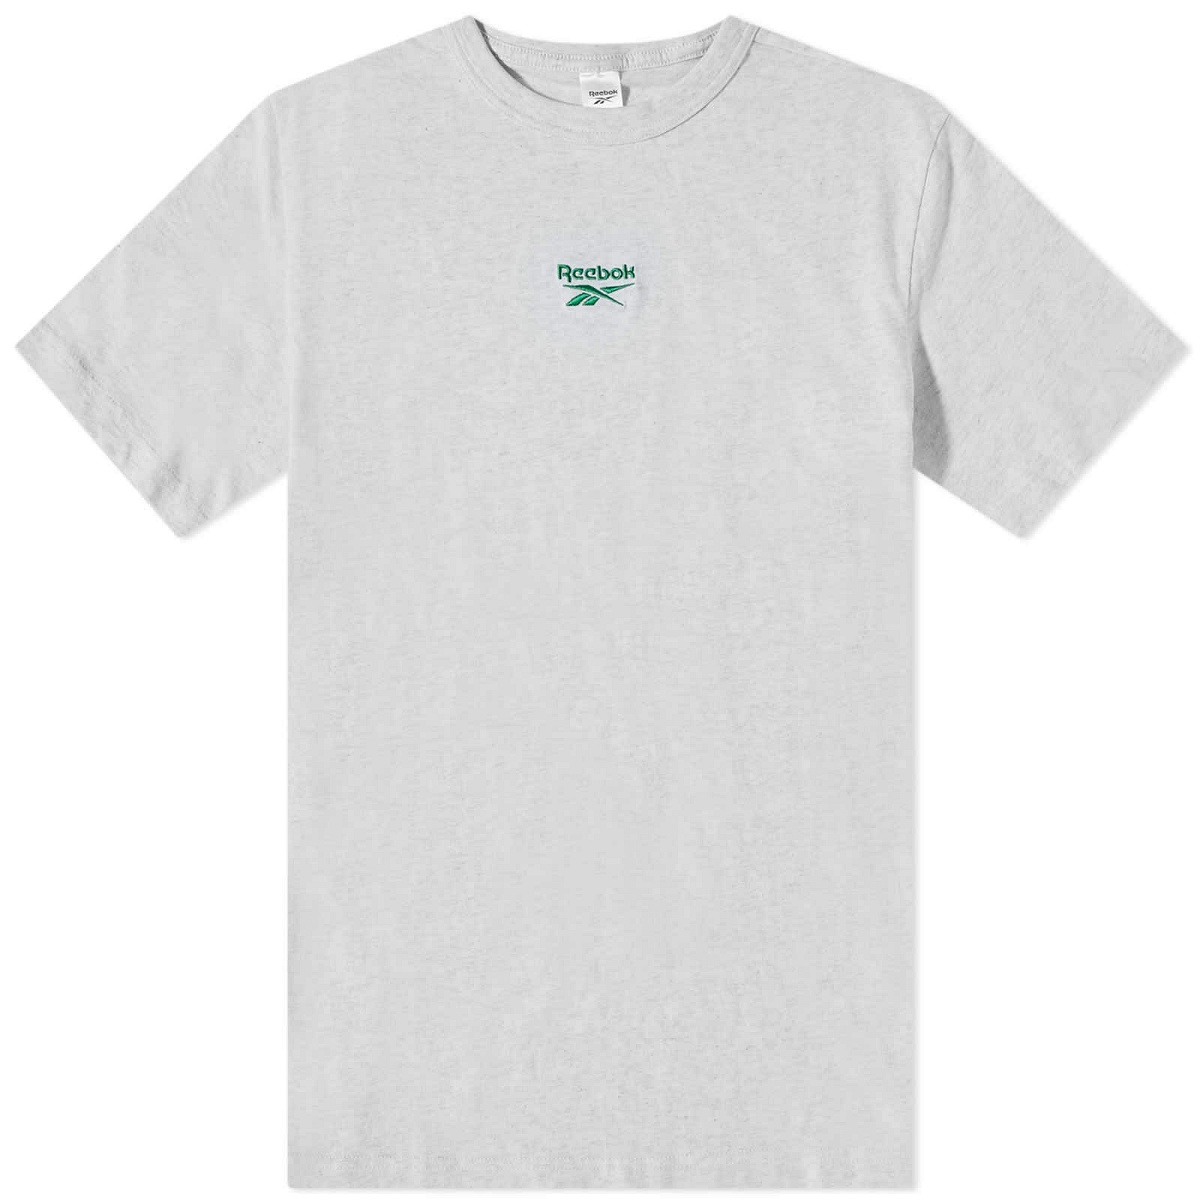 Reebok by Pyer Moss T-Shirt 3 Graphic White Collection Reebok